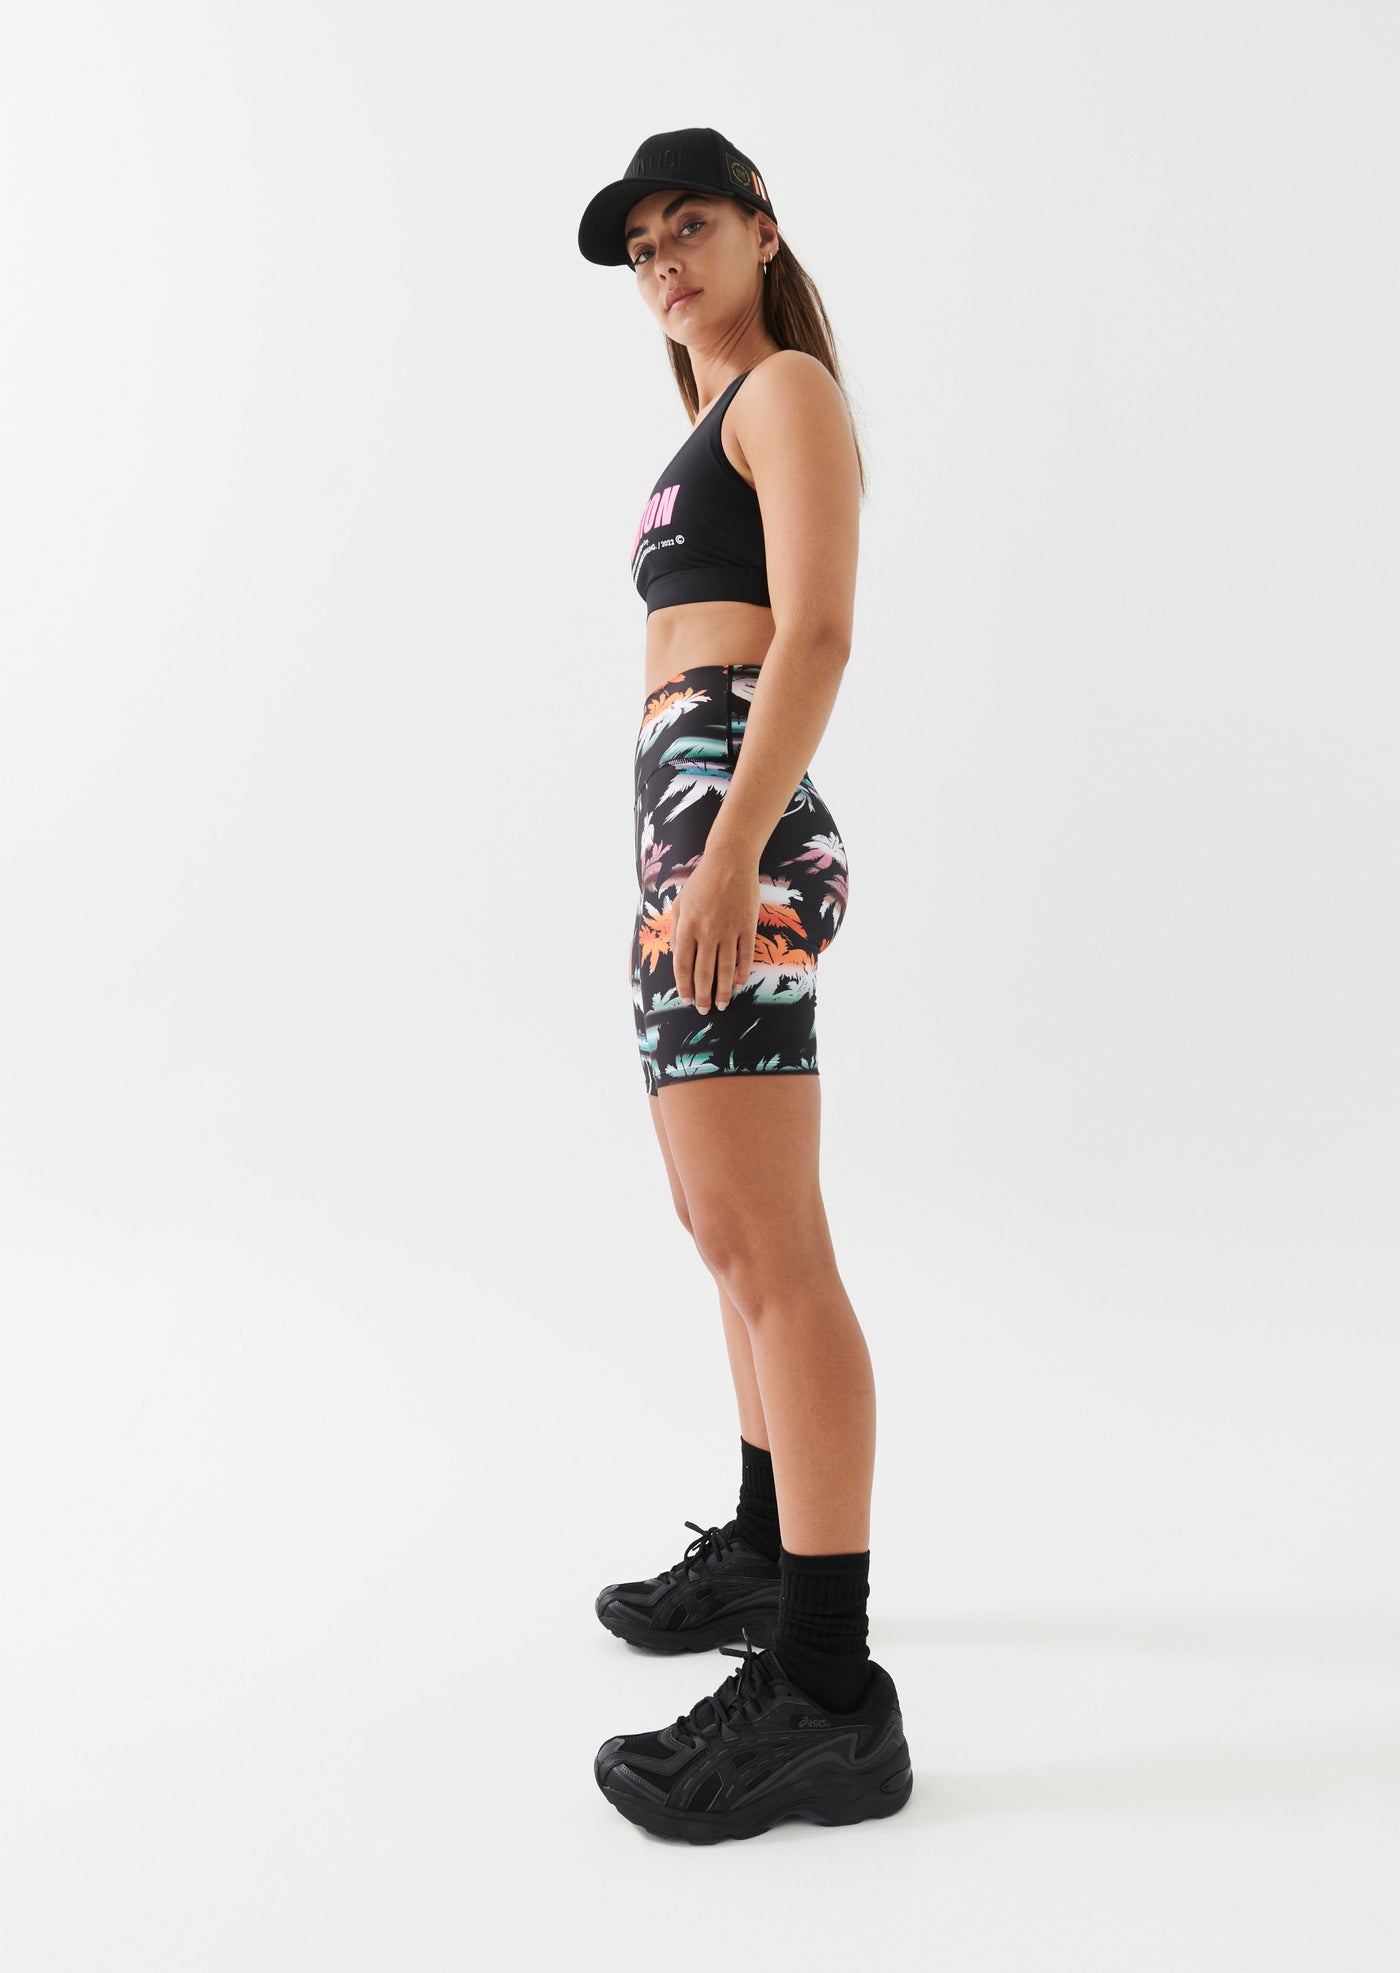 OASIS SHORT IN PALM TREE PRINT